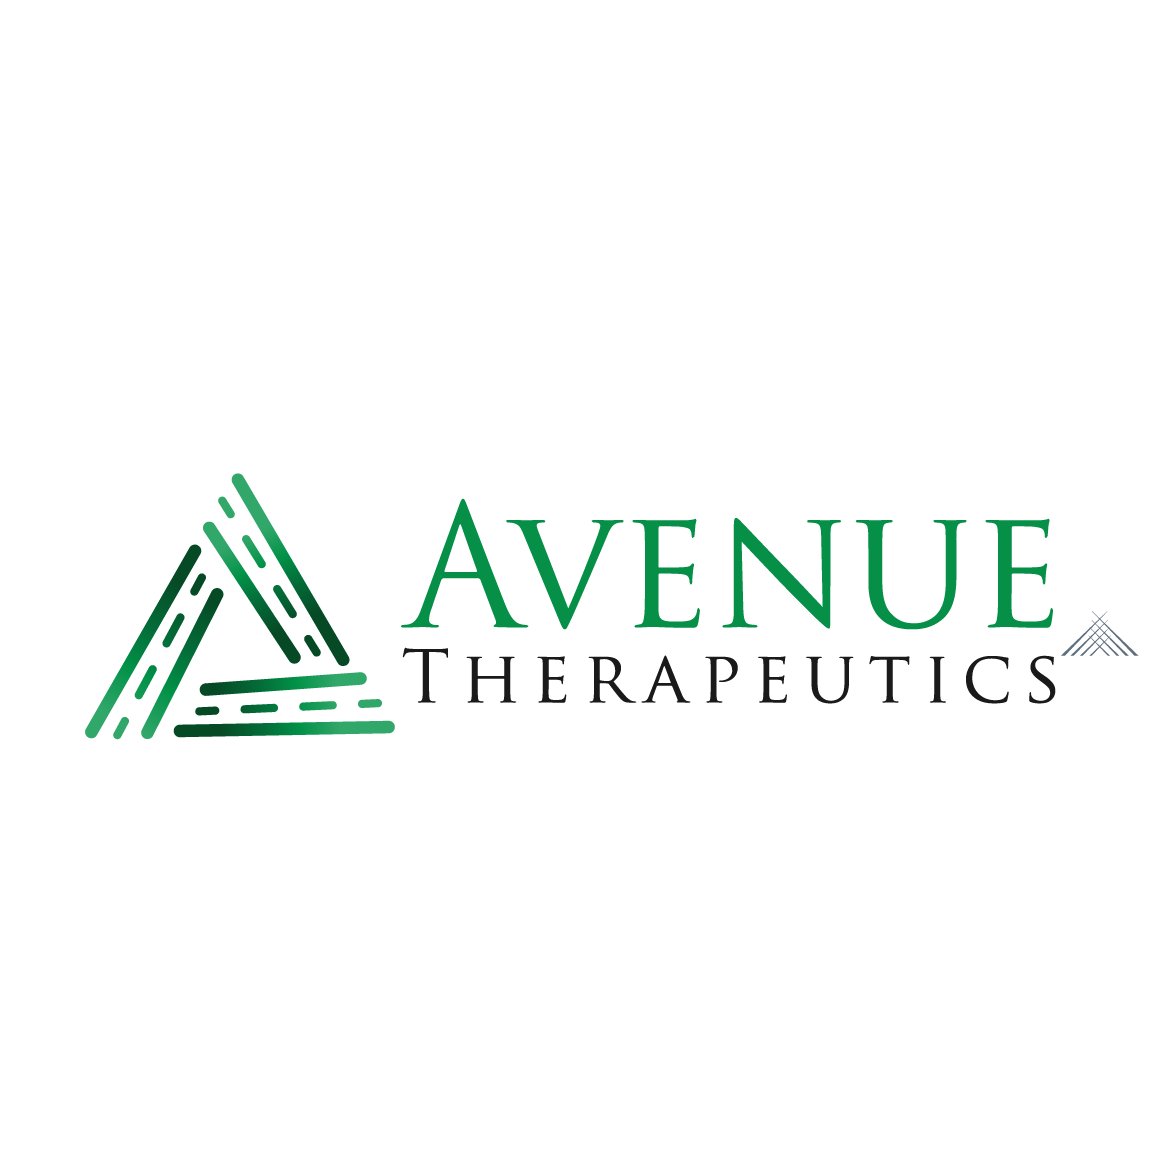 Avenue Therapeutics, a Fortress Biotech Company, is focused on the development and commercialization of IV tramadol for the management of postoperative pain.